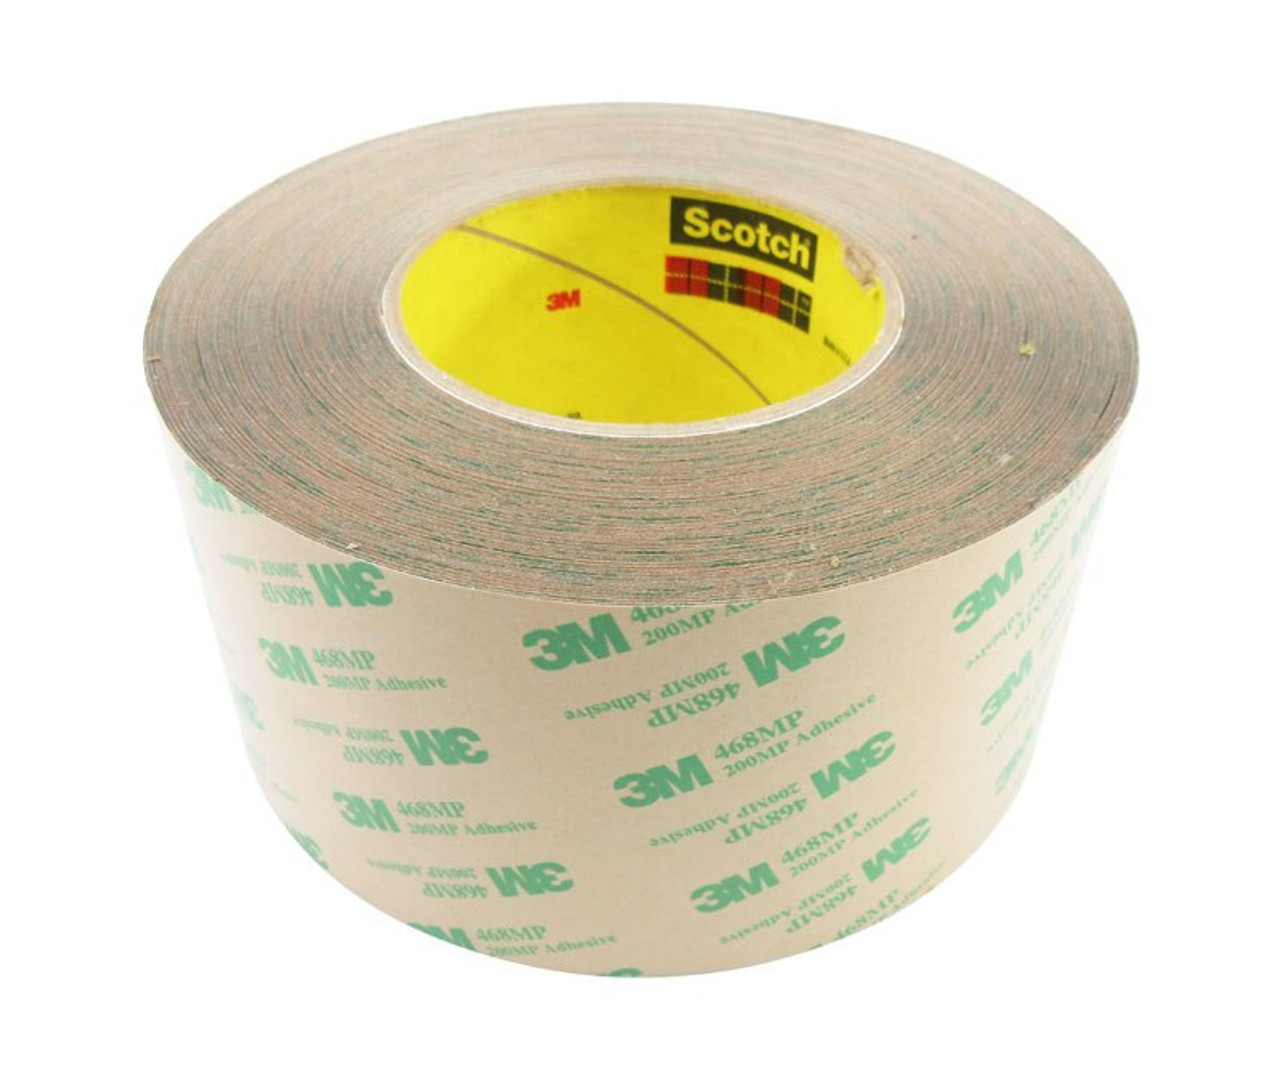 3M™ Adhesive Transfer Tape 468MP, Clear, 3 in X 60 yd, 5 mil